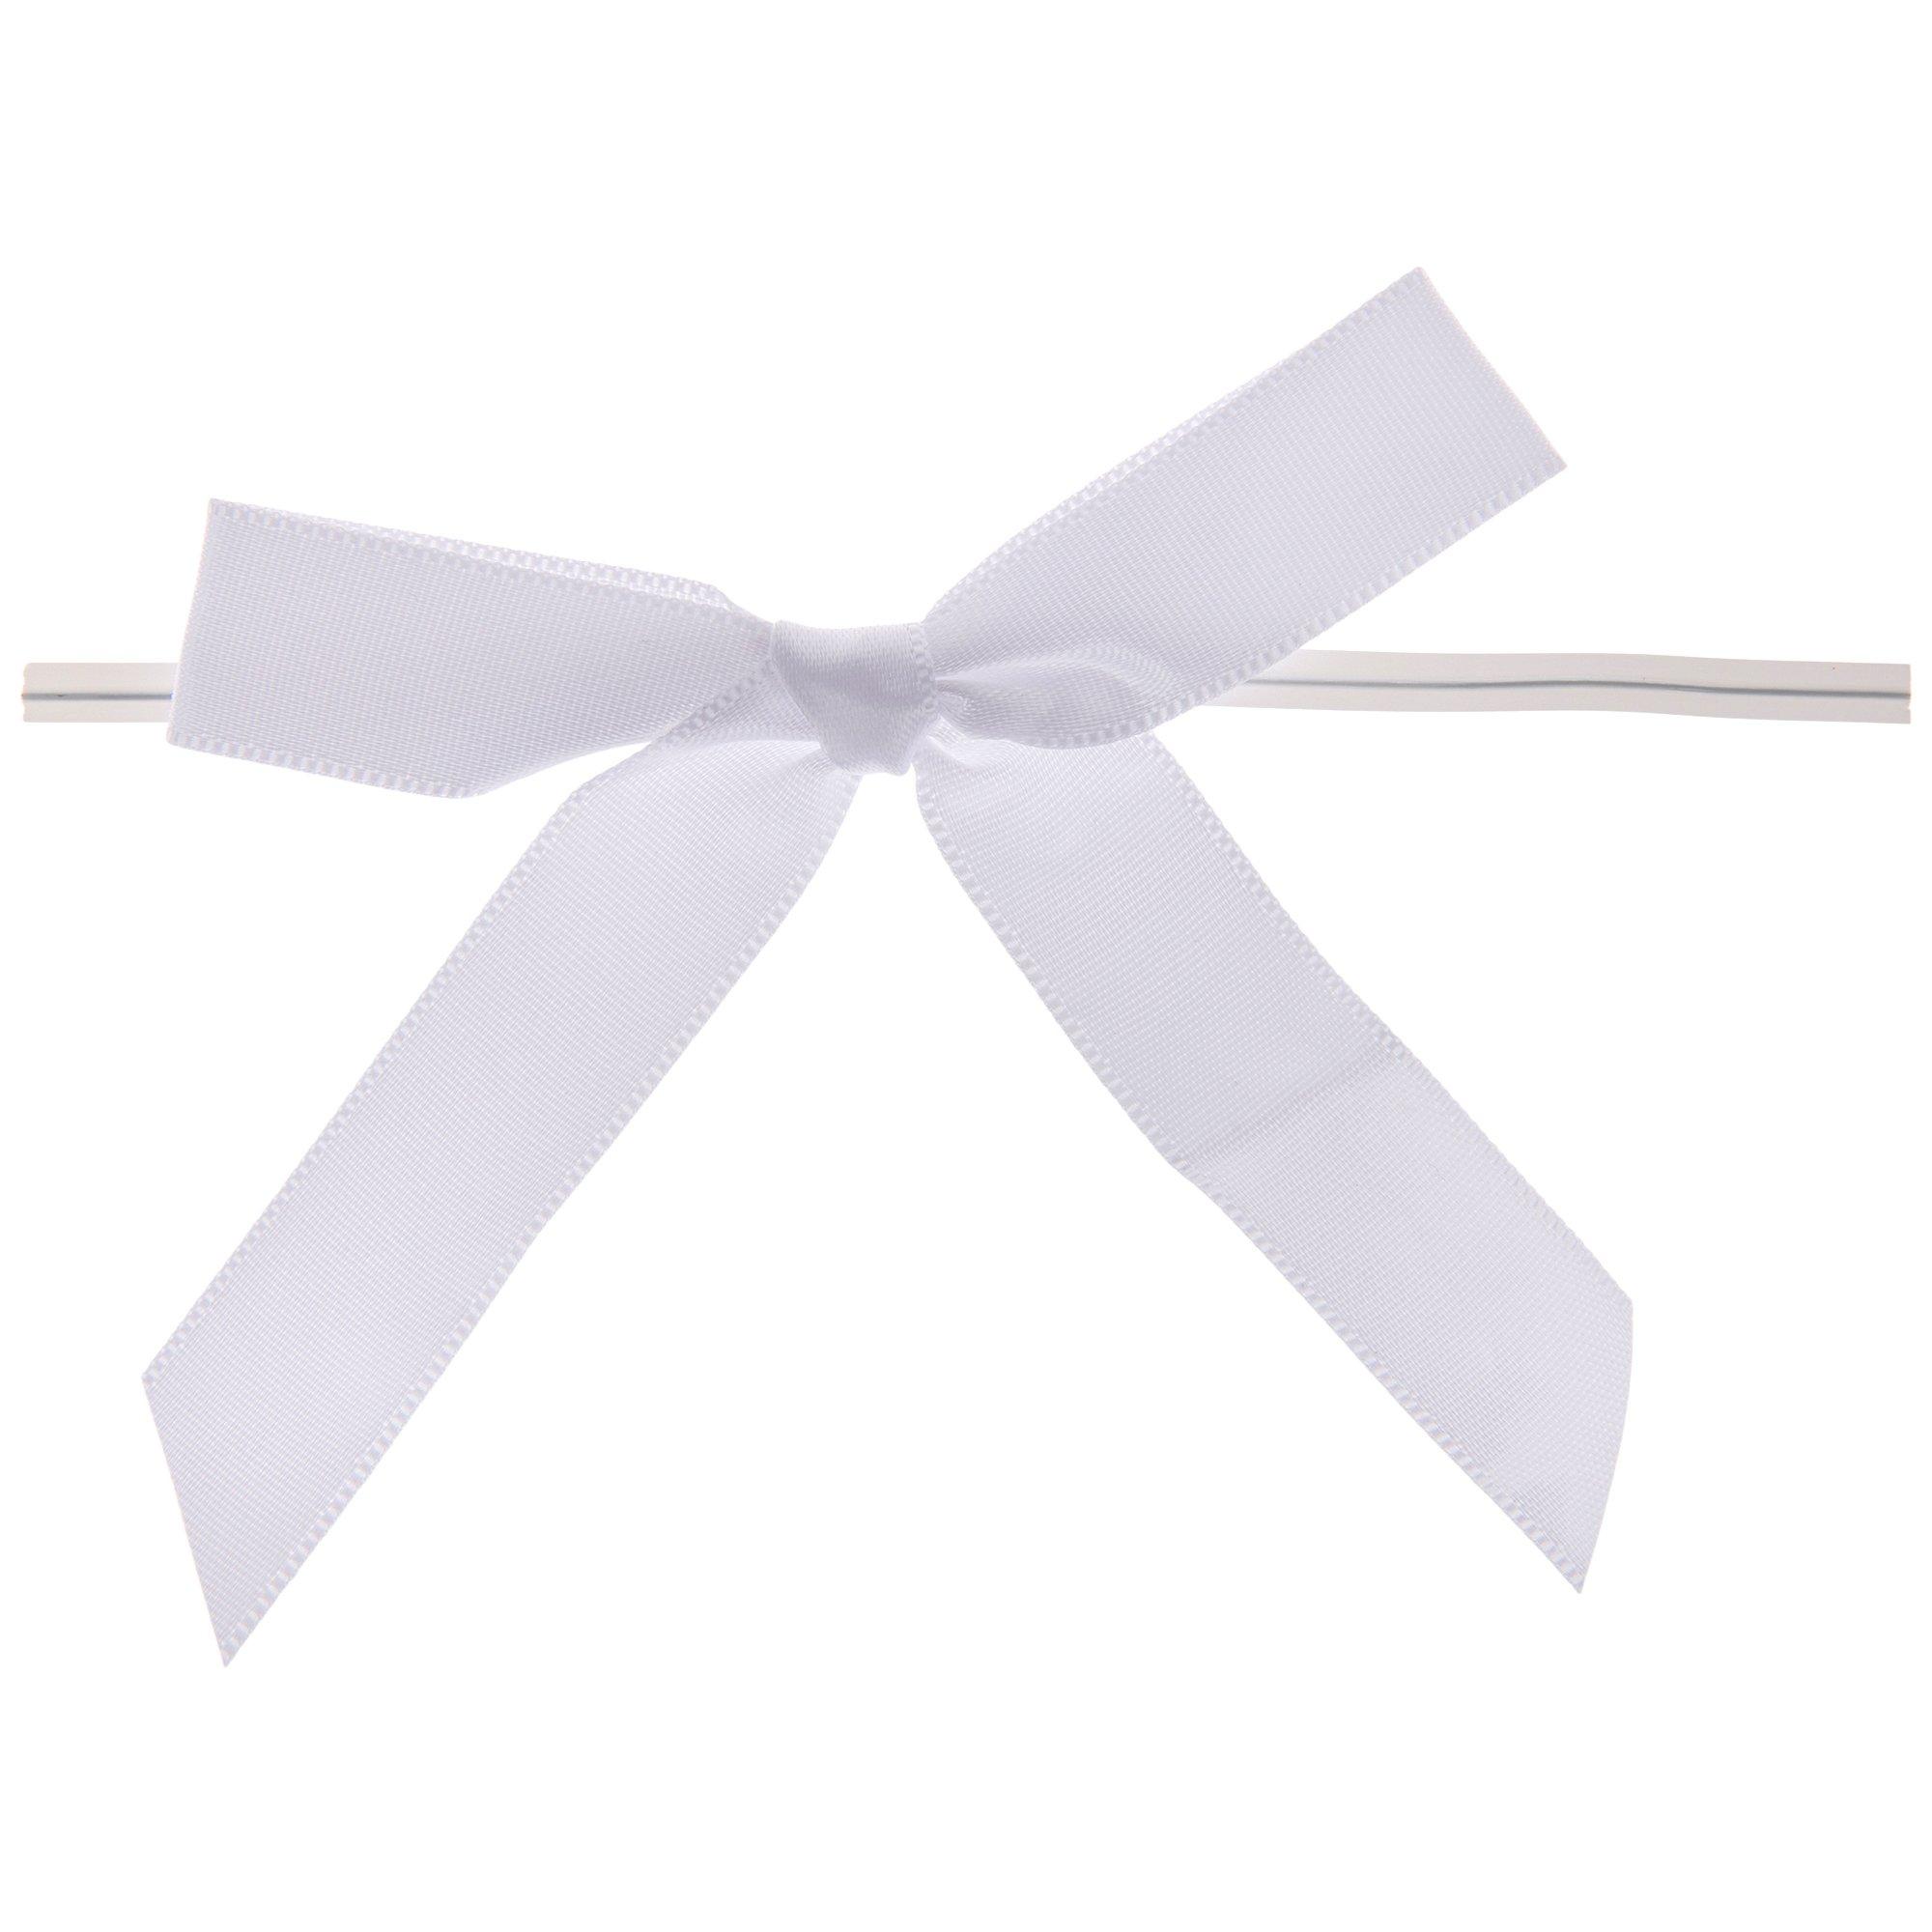 White Twist Tie Bow, 30 Pcs Small Bows for Crafts, Christmas White Bows for  Gift wrapping, Mini Pretied Satin Ribbon Bows, Twist Tie Bows for Treat